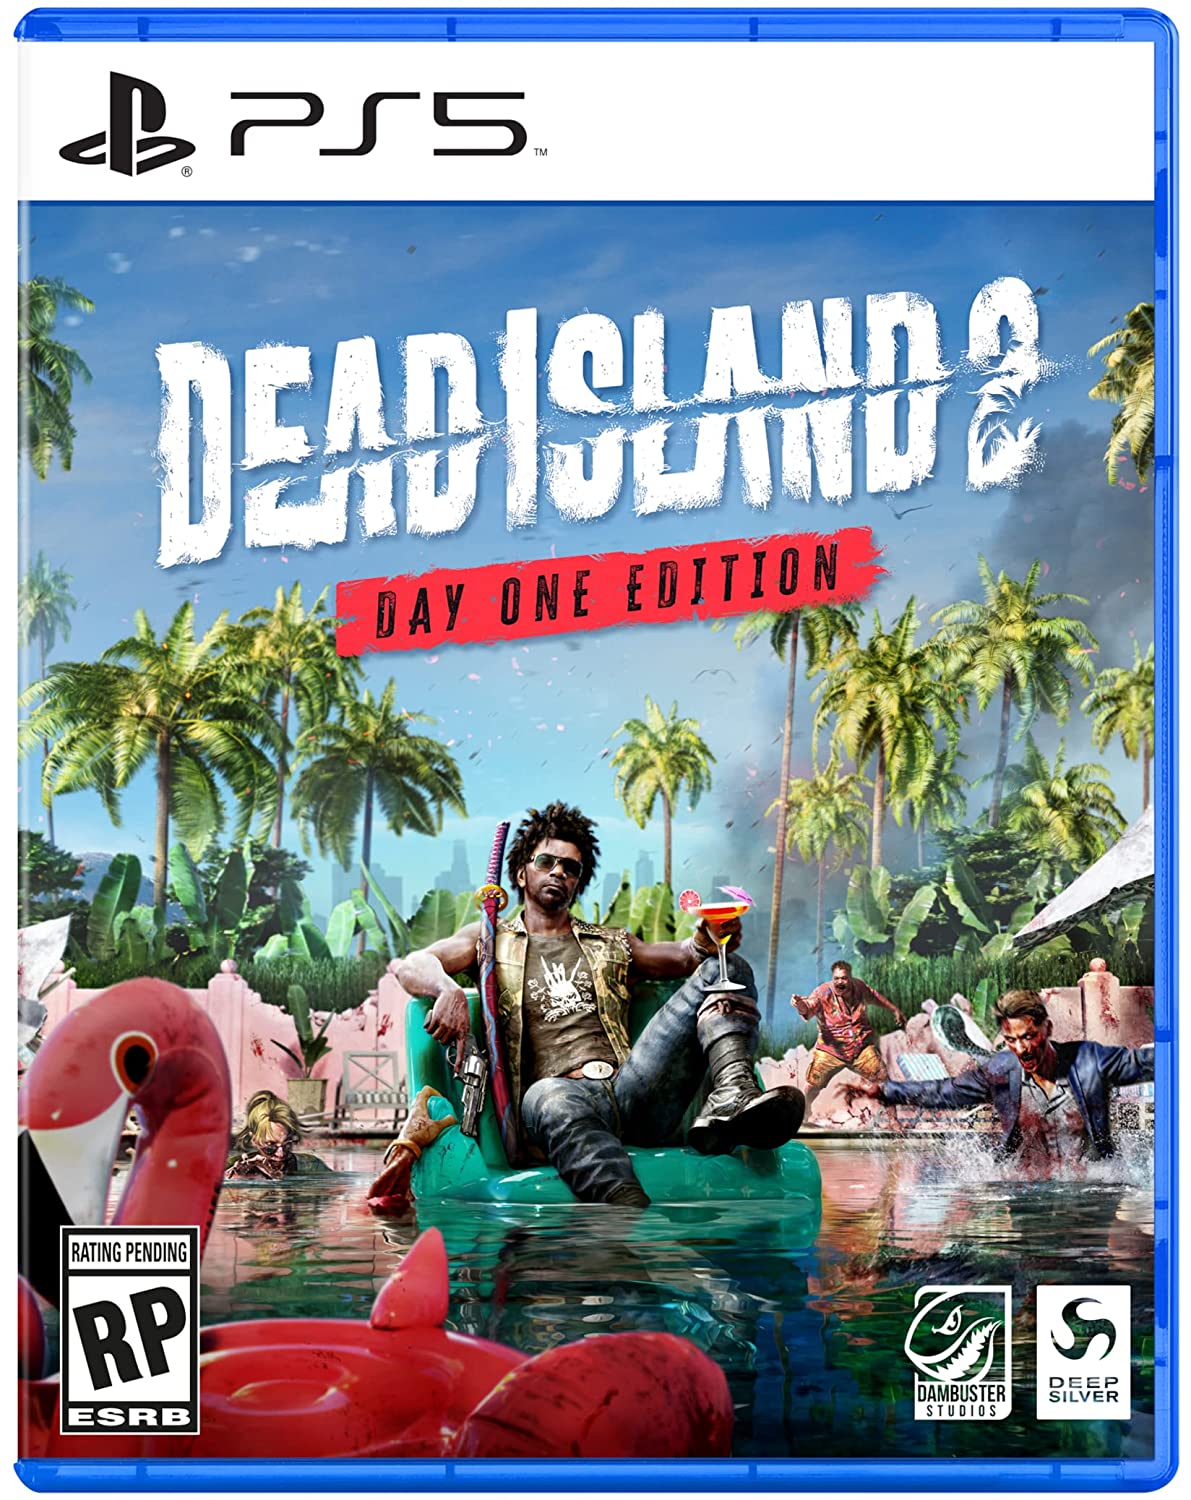 Dead Island 2 release date  UK launch time, pre-order and